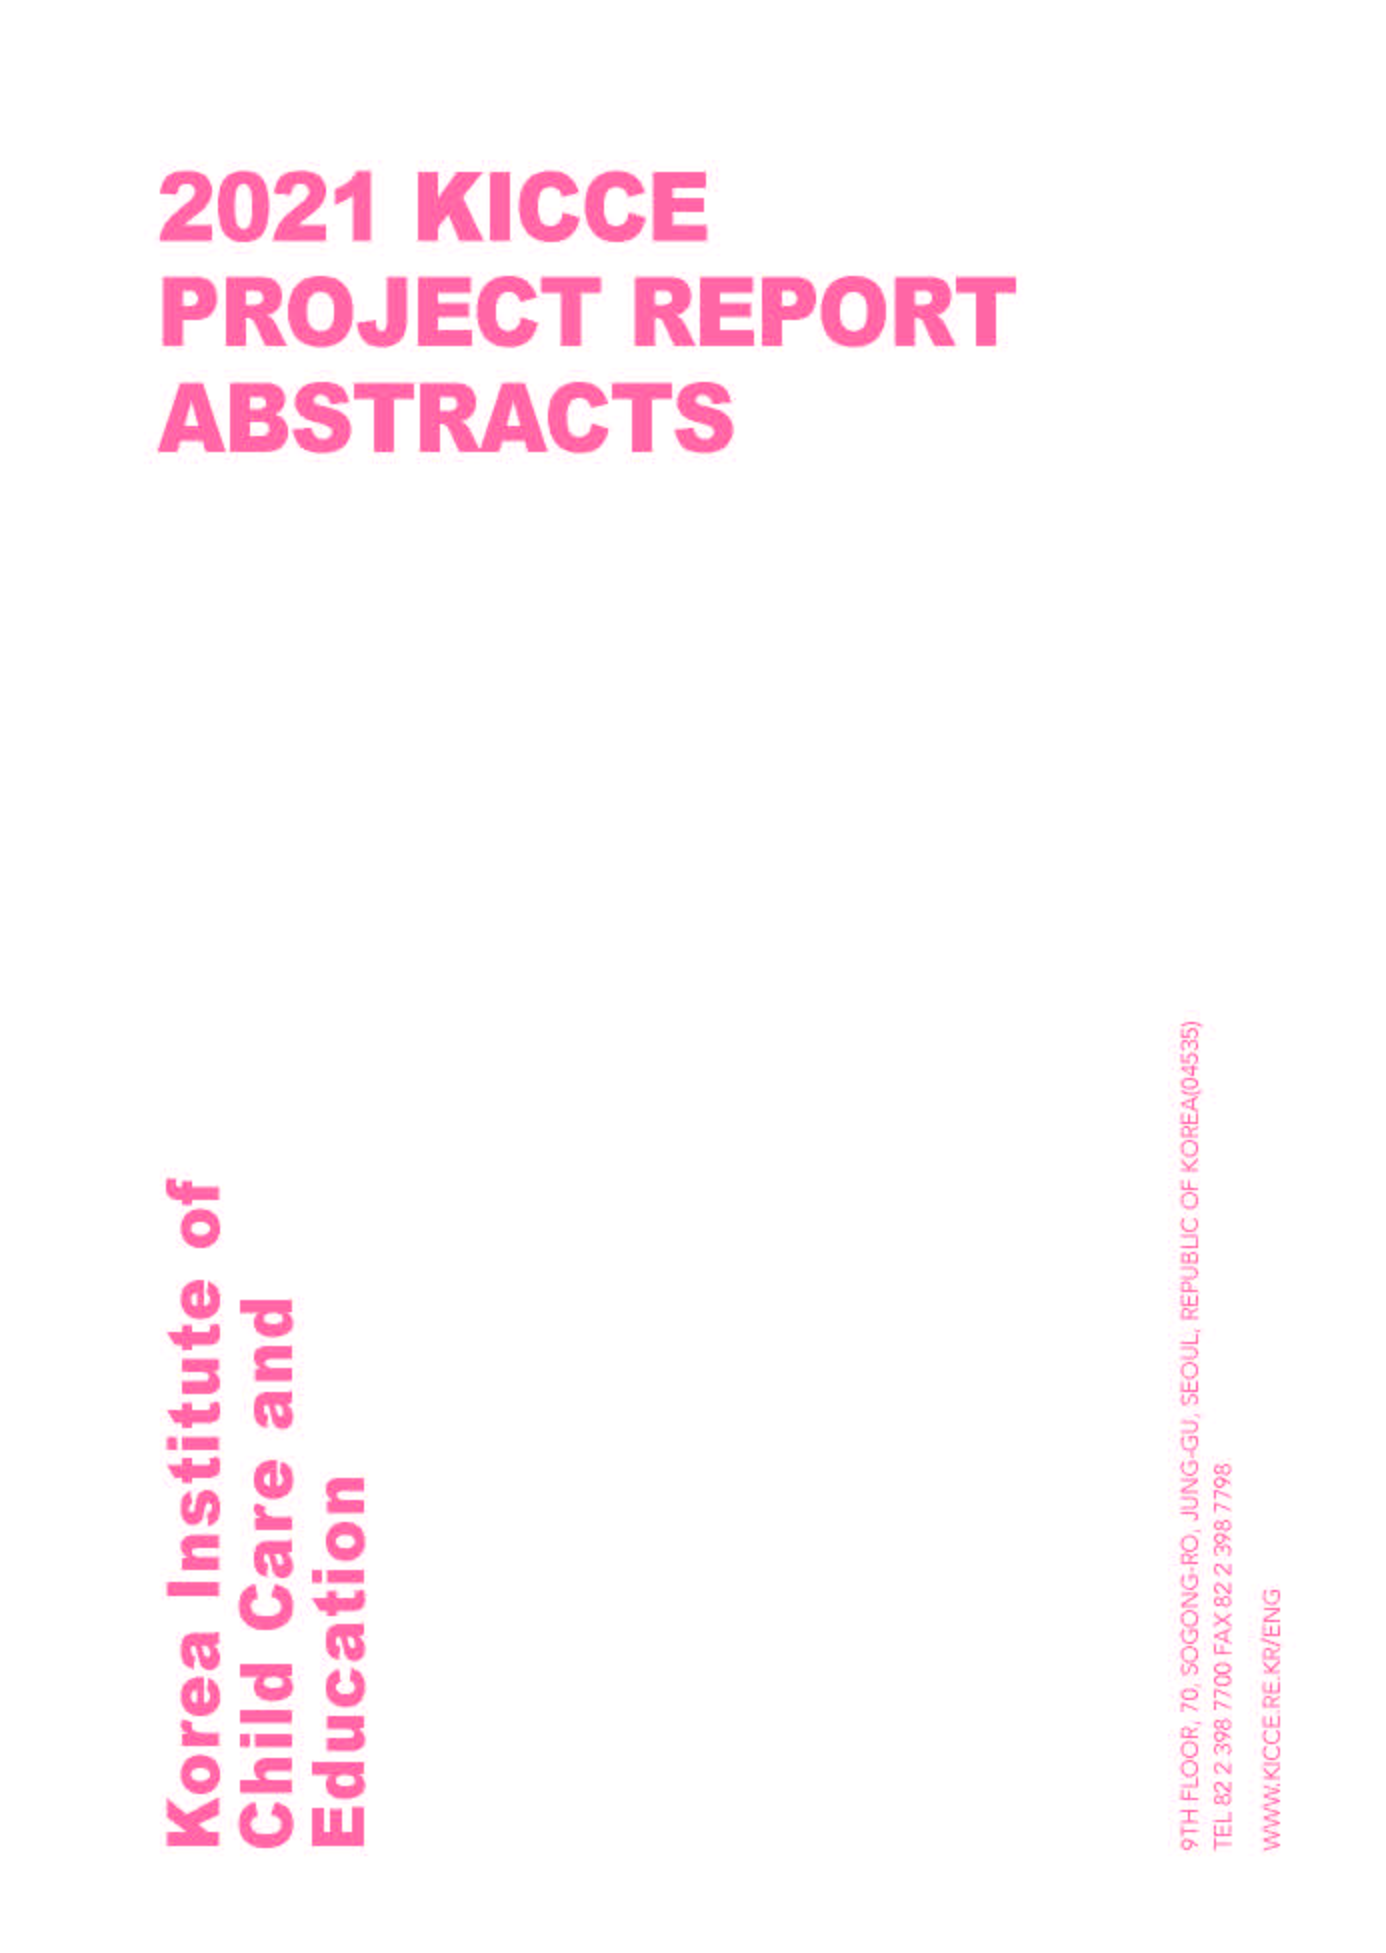 2021 KICCE Project Report Abstracts 표지 이미지 입니다.